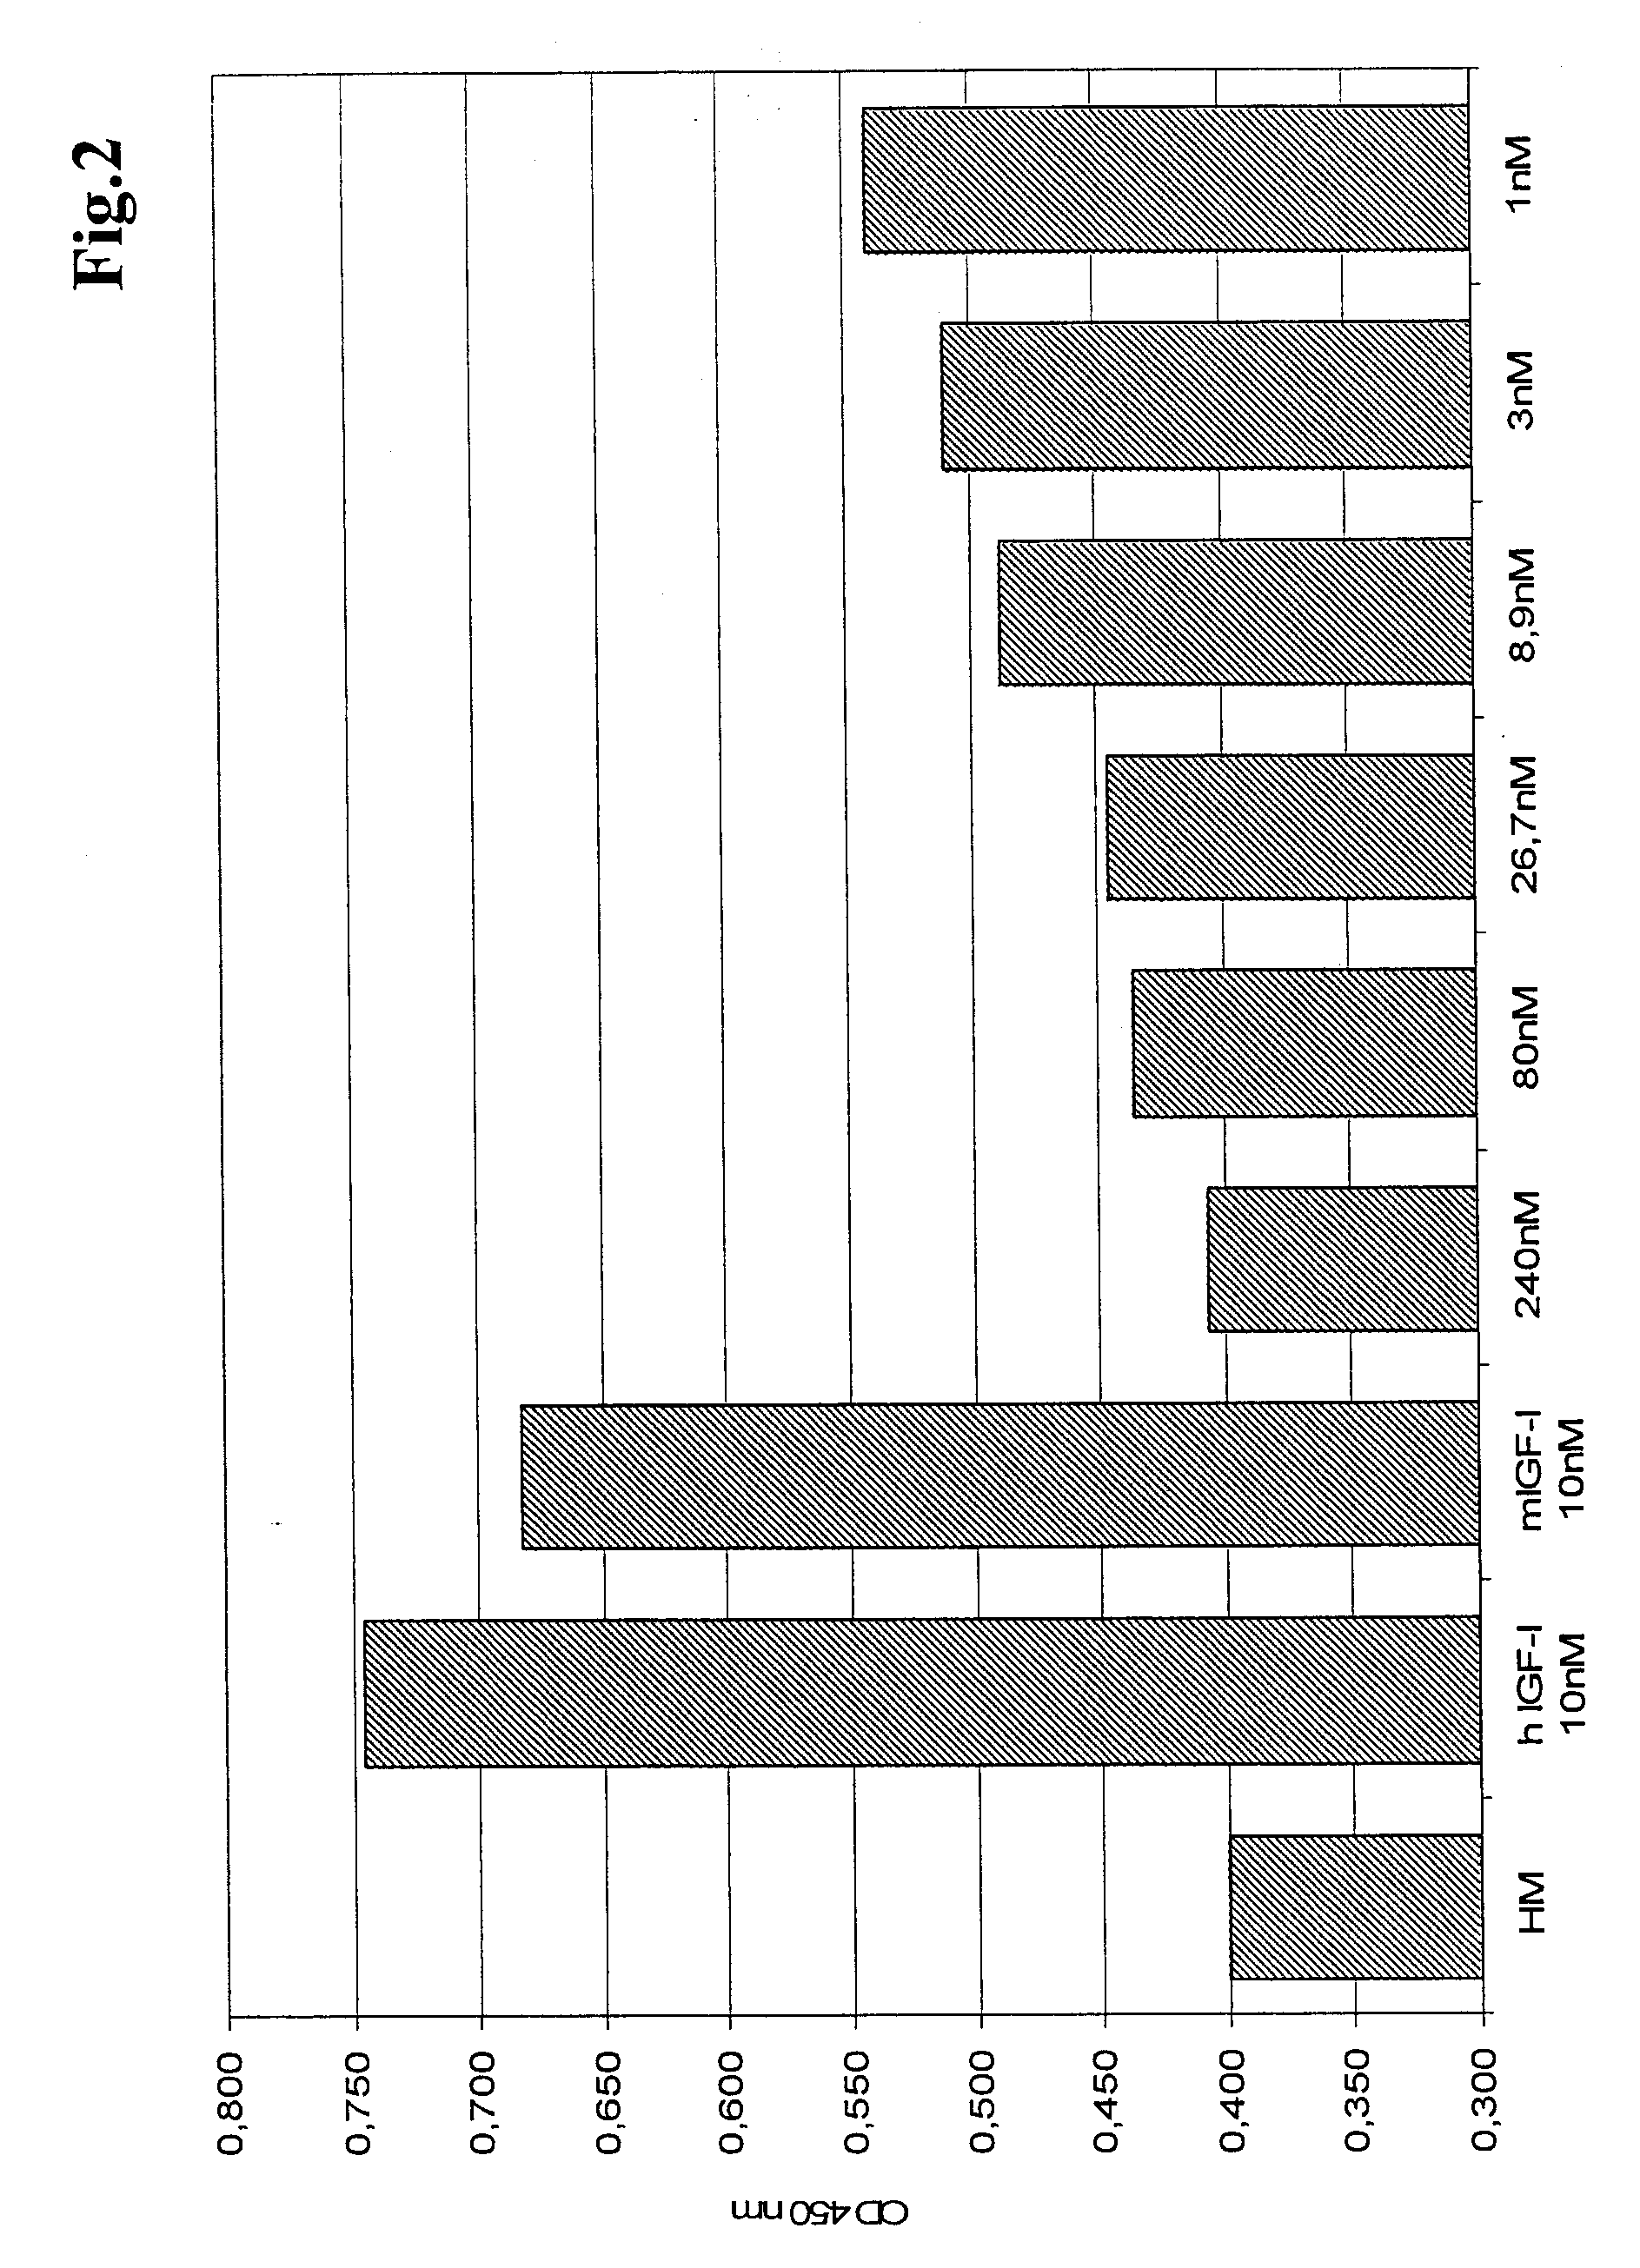 Antibodies against insulin-like growth factor i receptor and uses thereof